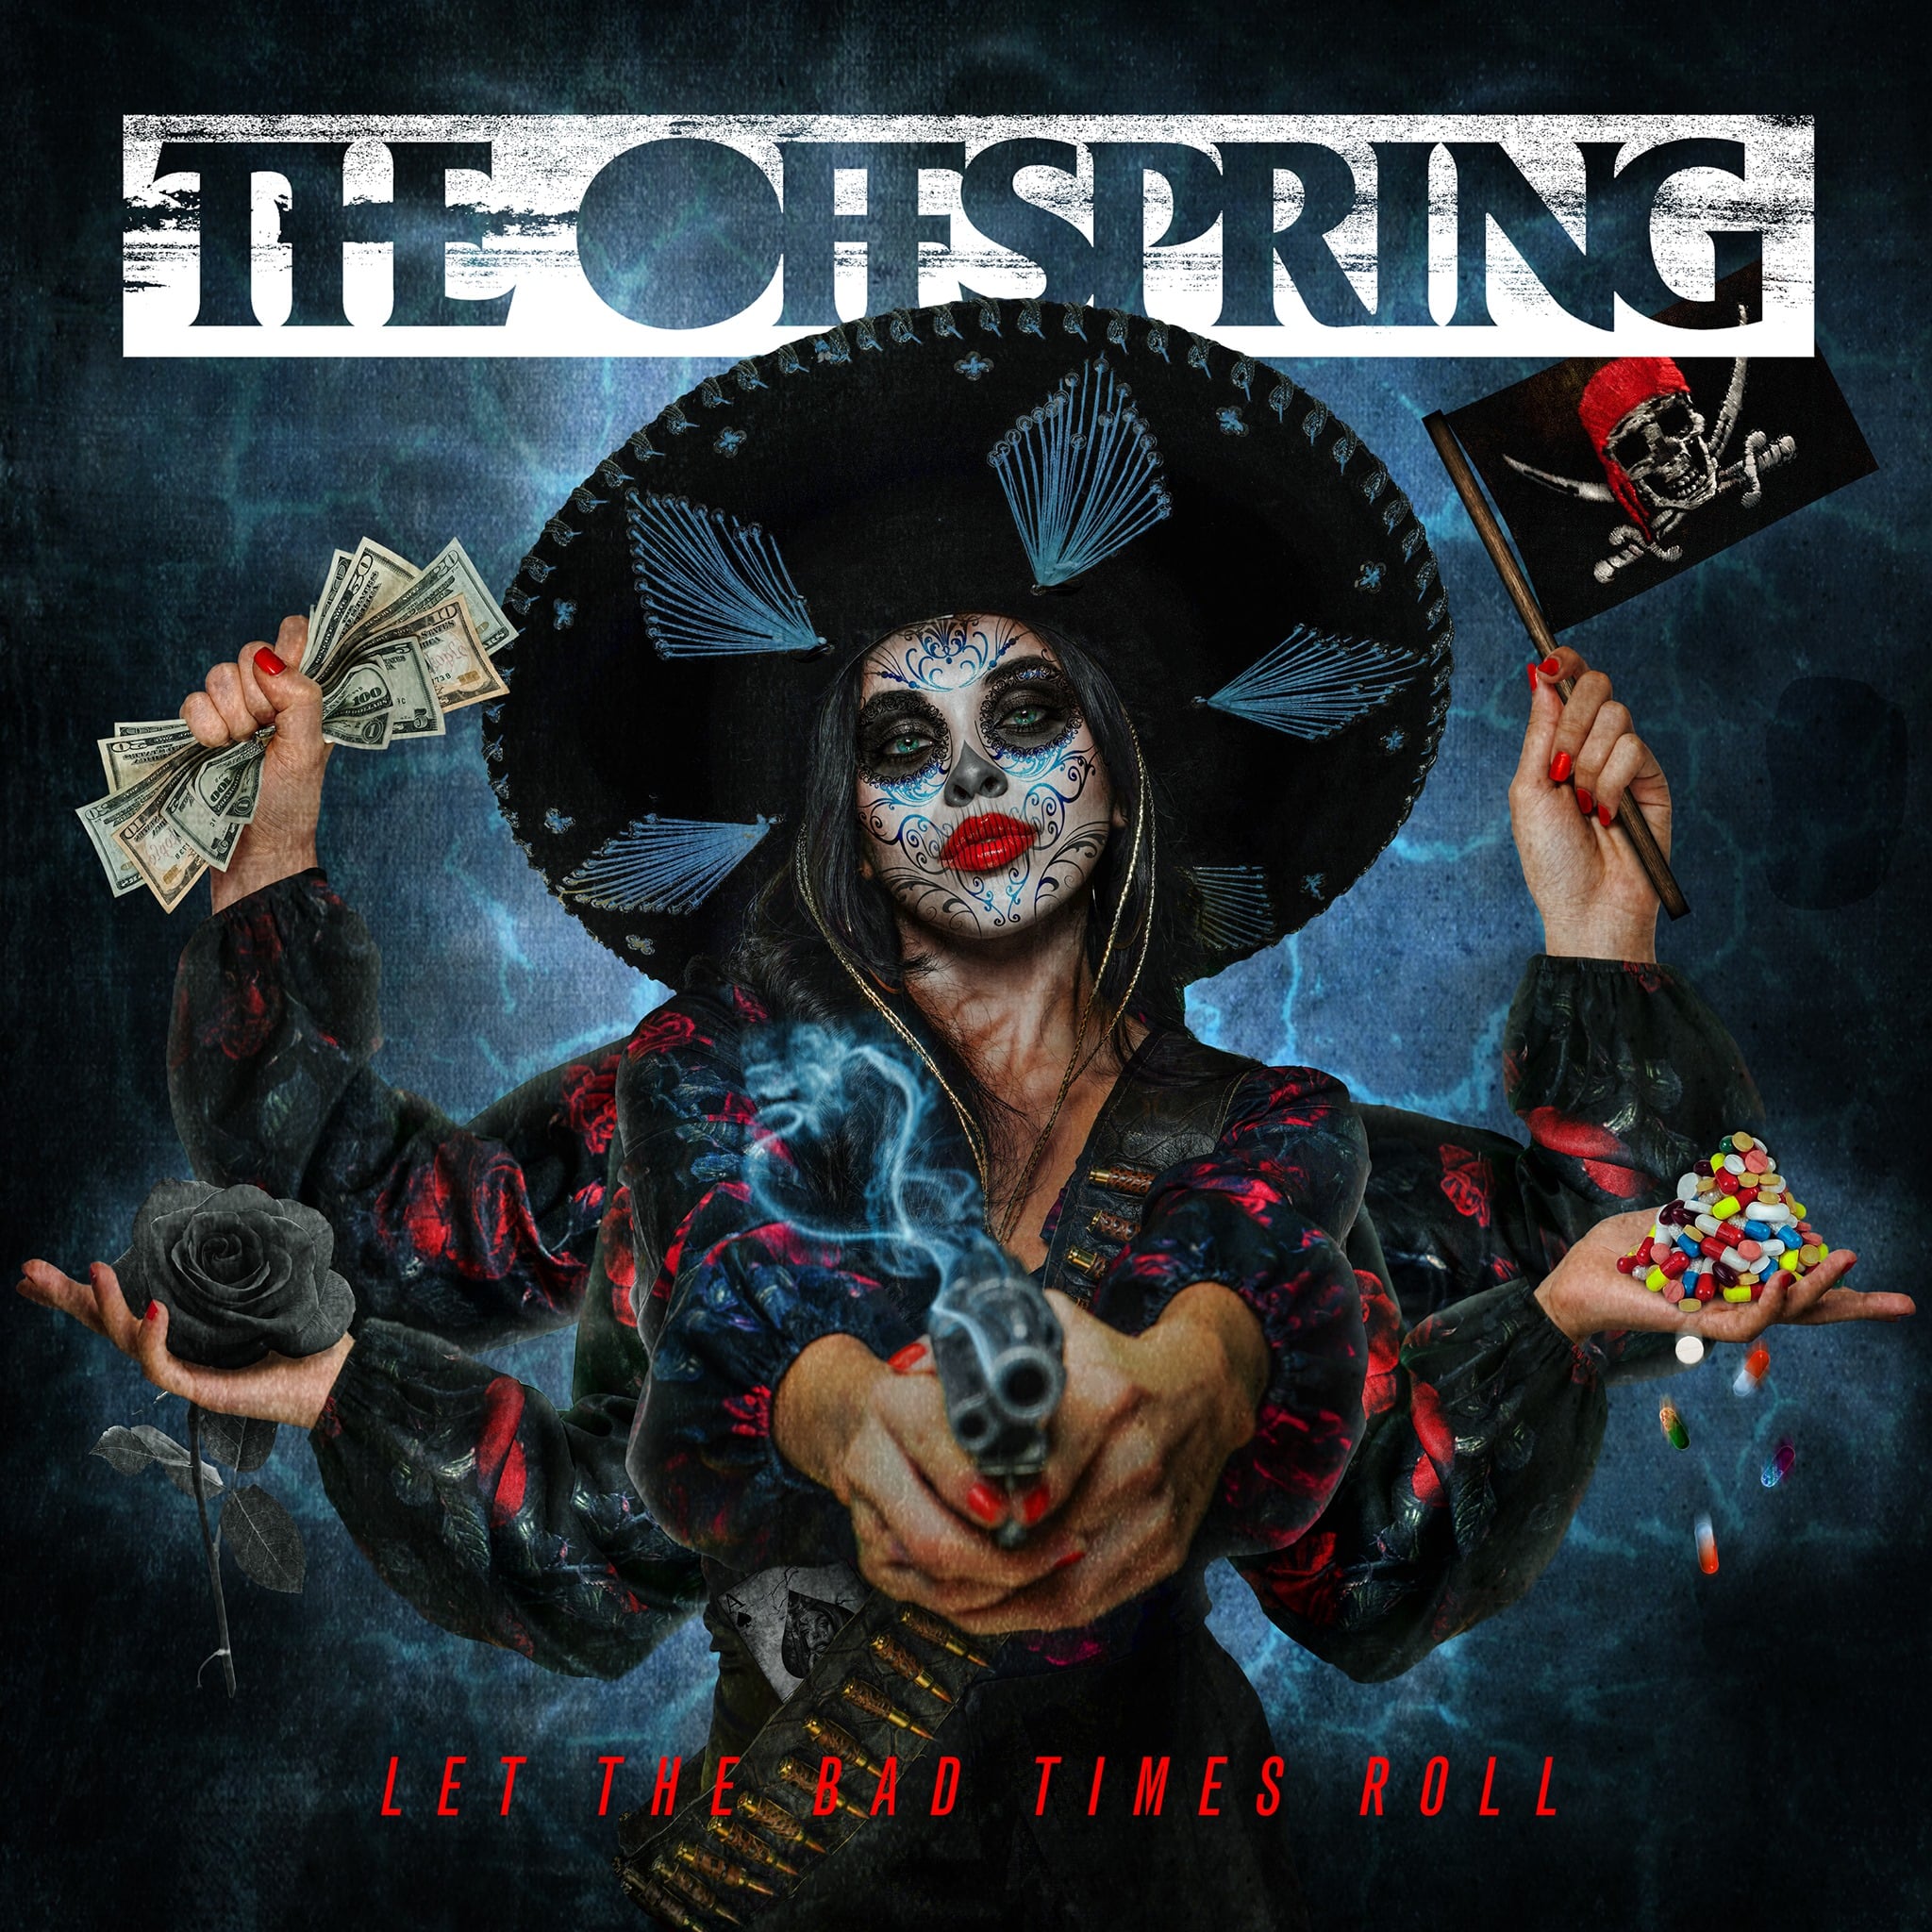 NY LÅT: The Offspring - We Never Have Sex Anymore 1